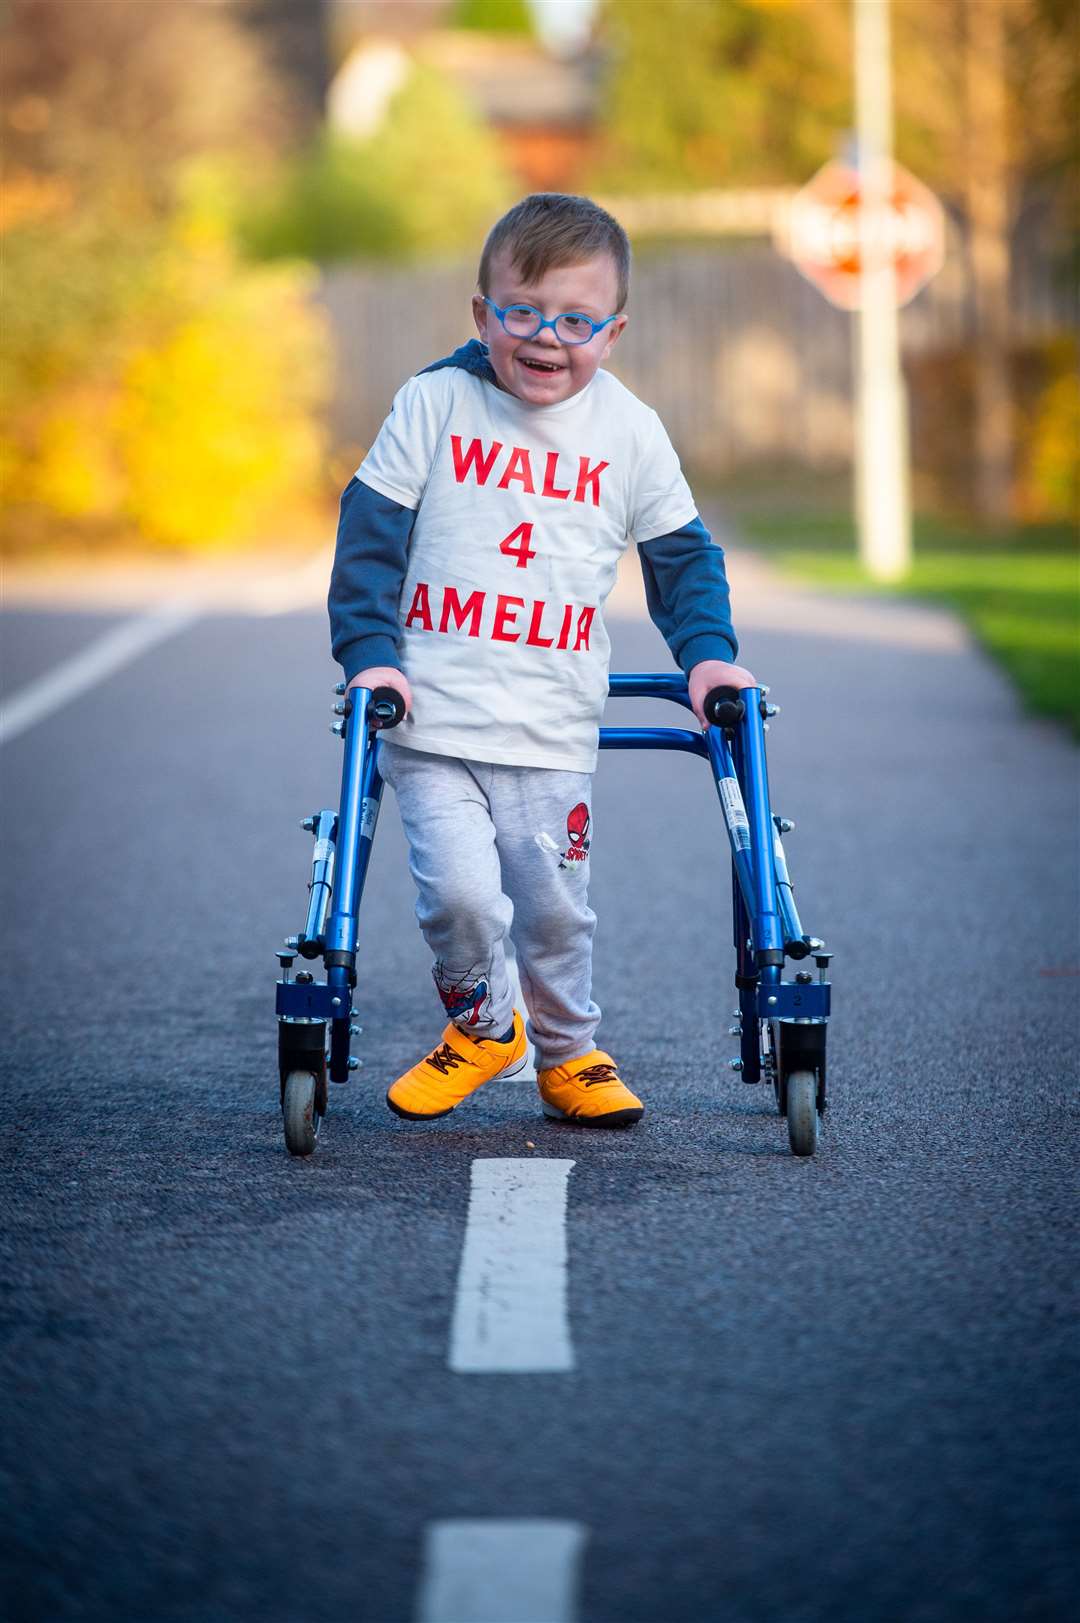 Harry Ritchie-Mackenzie was born with a congenital heart defect, treatment for which resulted in a brain injury that medics said would leave him unable to walk.